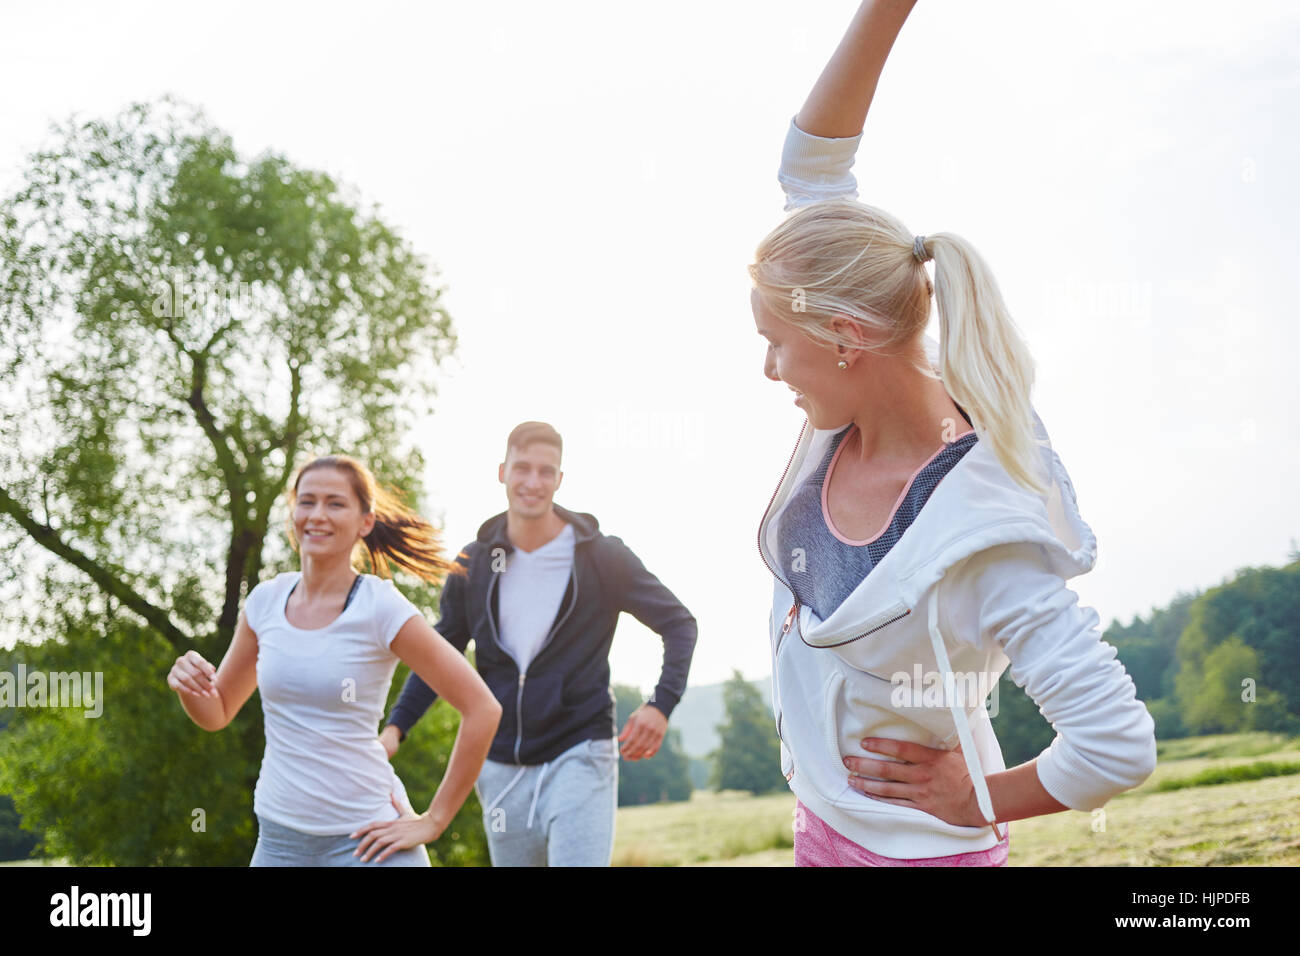 Group of active people making fitness training exercises Stock Photo